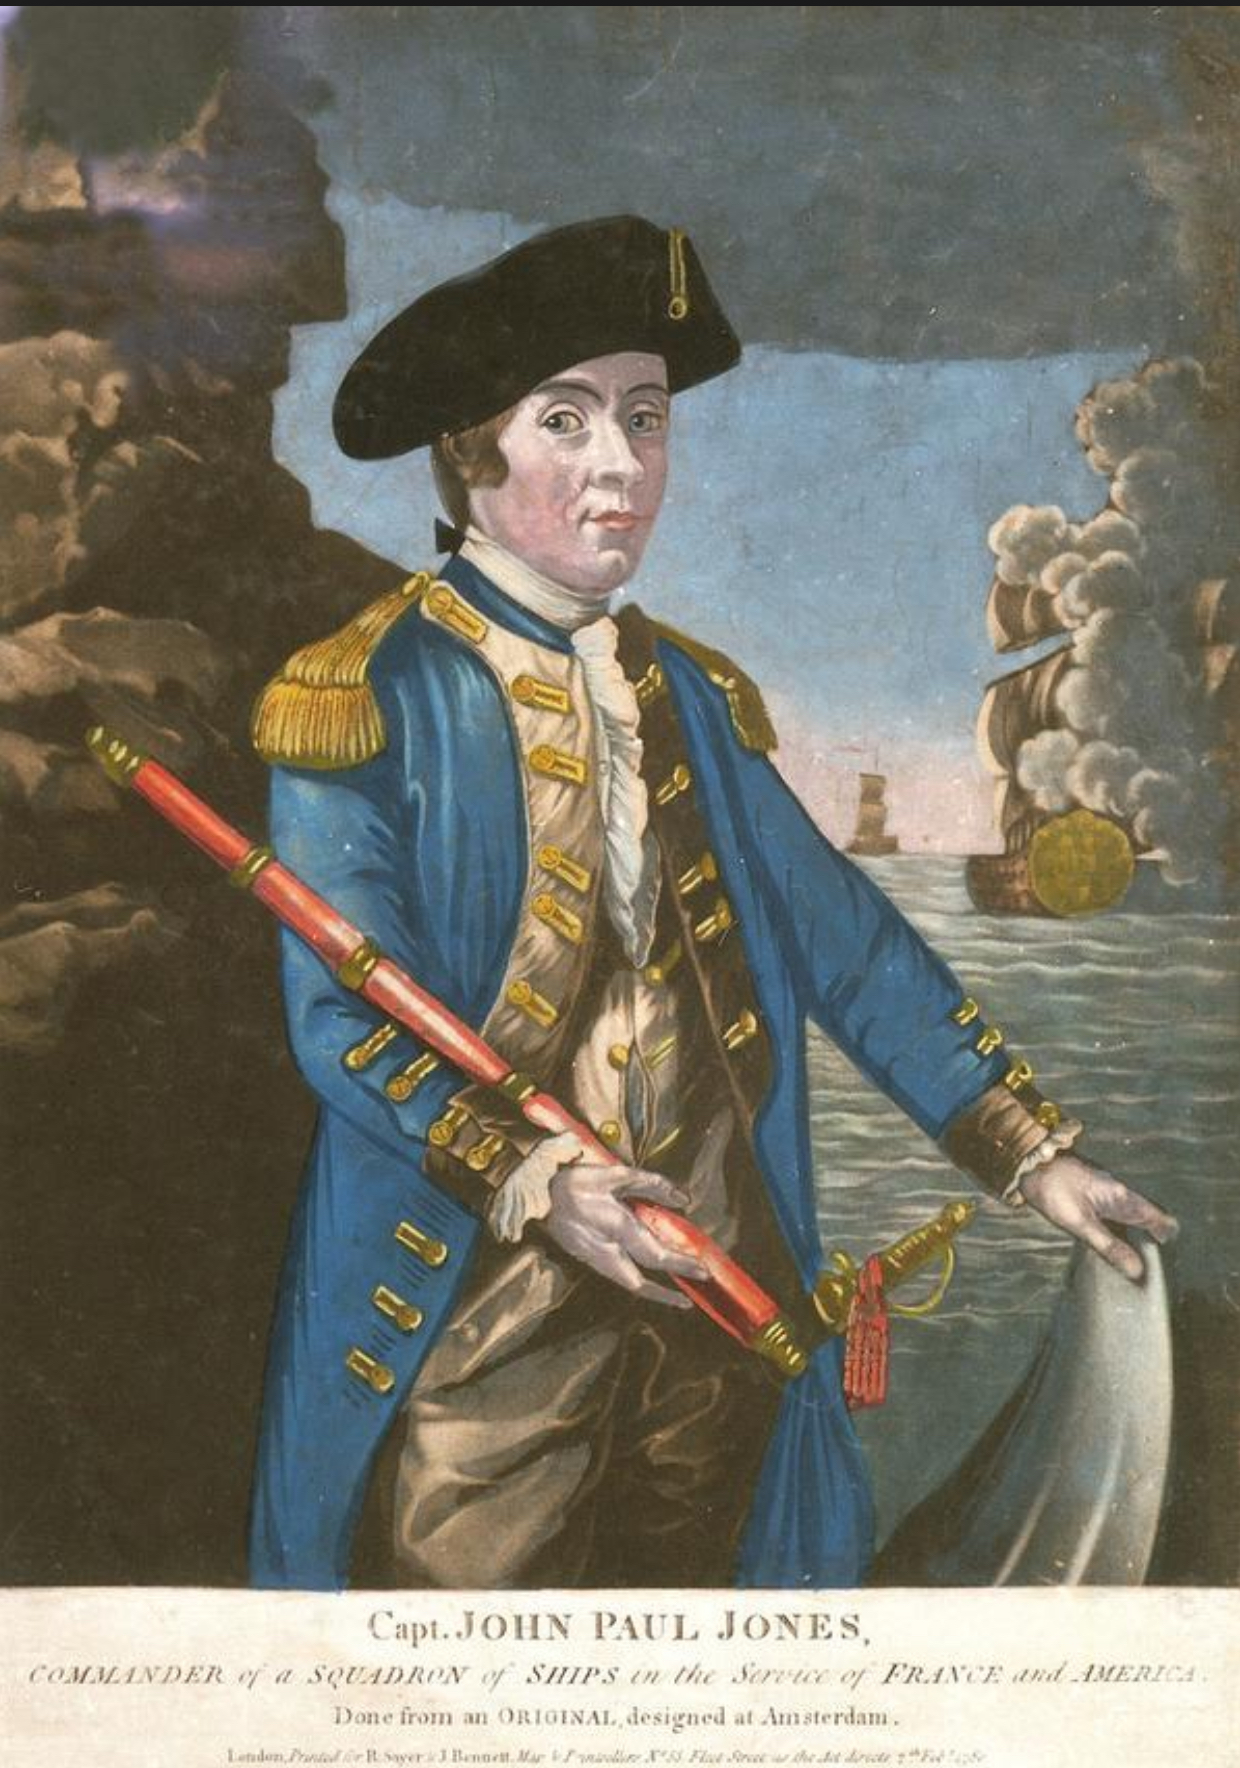 Capt. John Paul Jones. Commander of a Squadron of Ships in the Service of France and America. (London: Printed for R. Sayer and J. Bennett, 7 February 1780). National Maritime Museum, Greenwich.